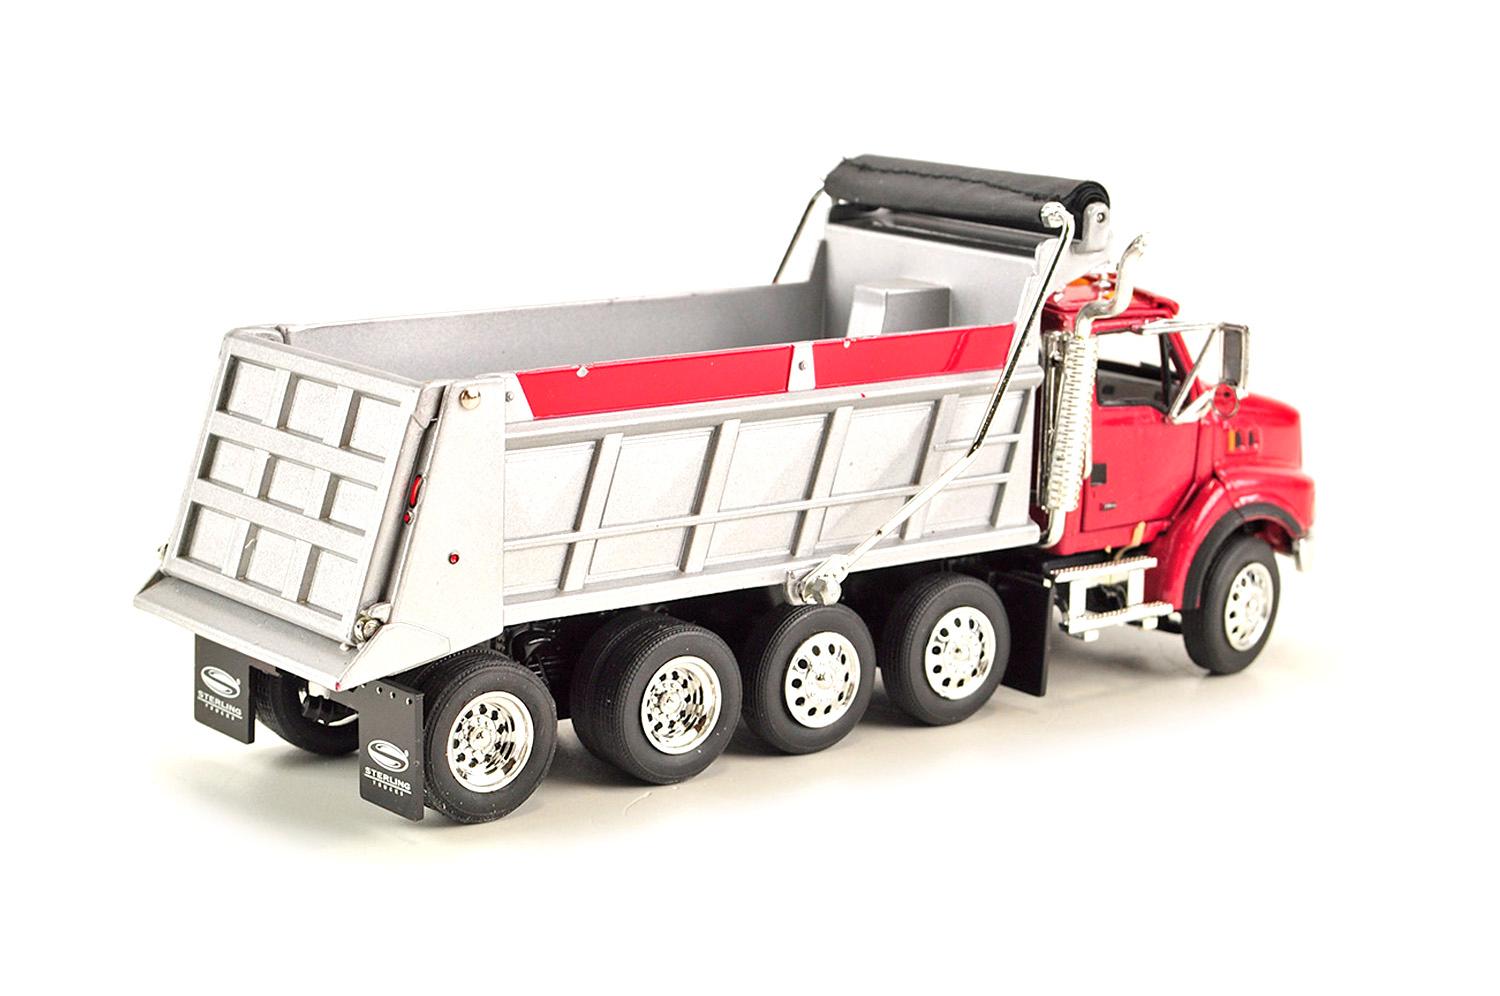 Sterling Dump Truck w/Red Cab - 1:53